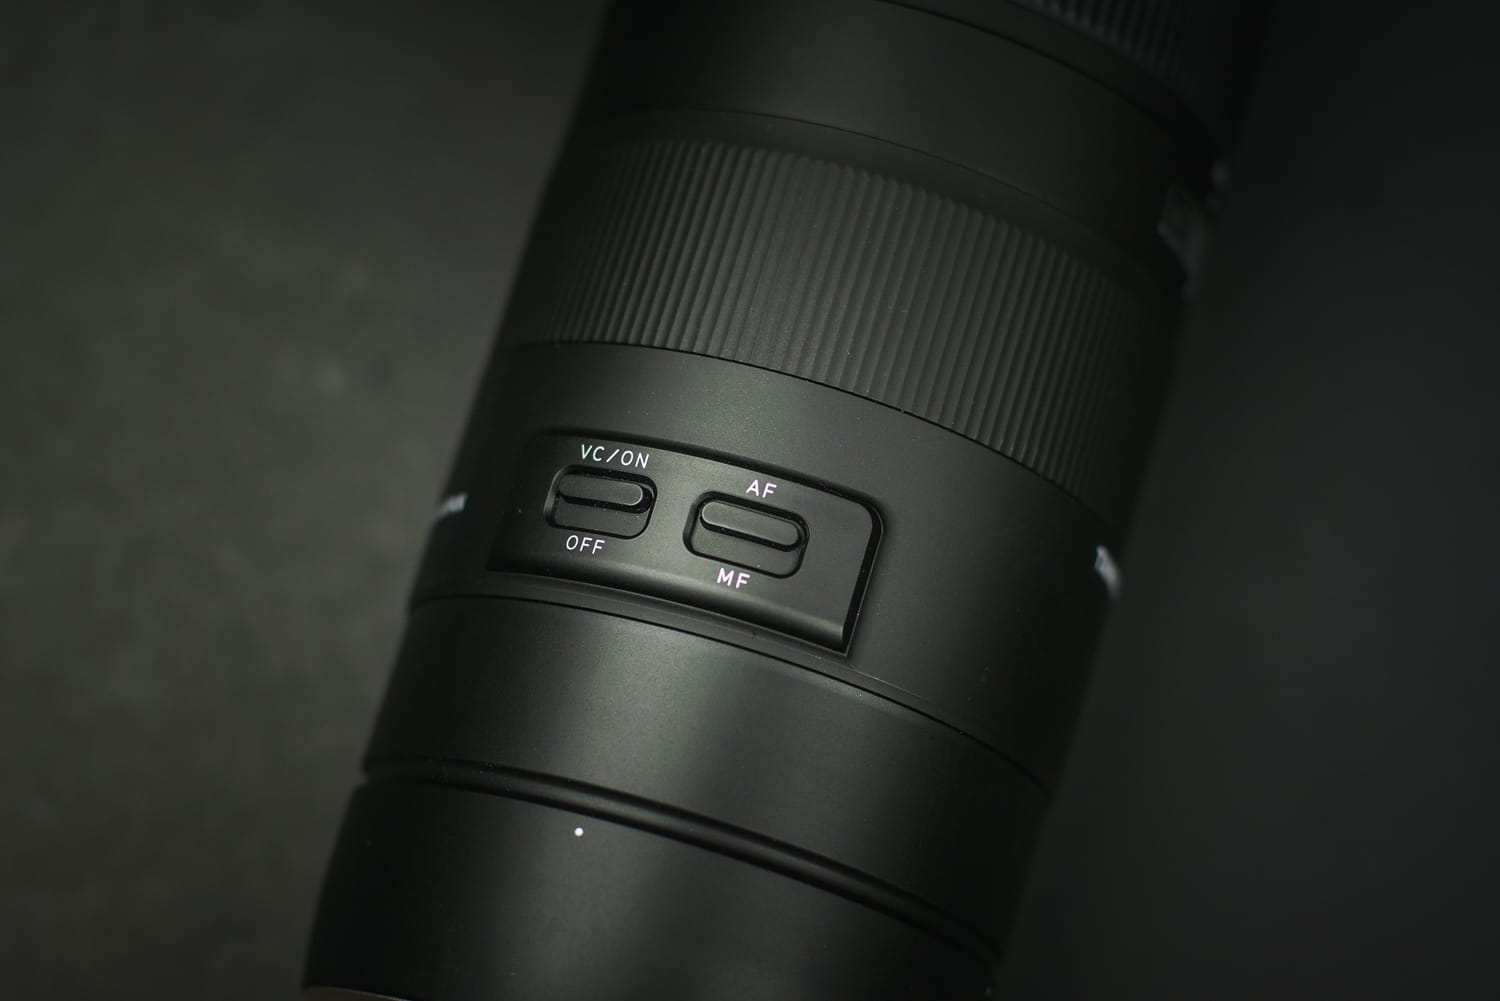 Reviewing the Tamron 70-210mm F4 Di VC USD